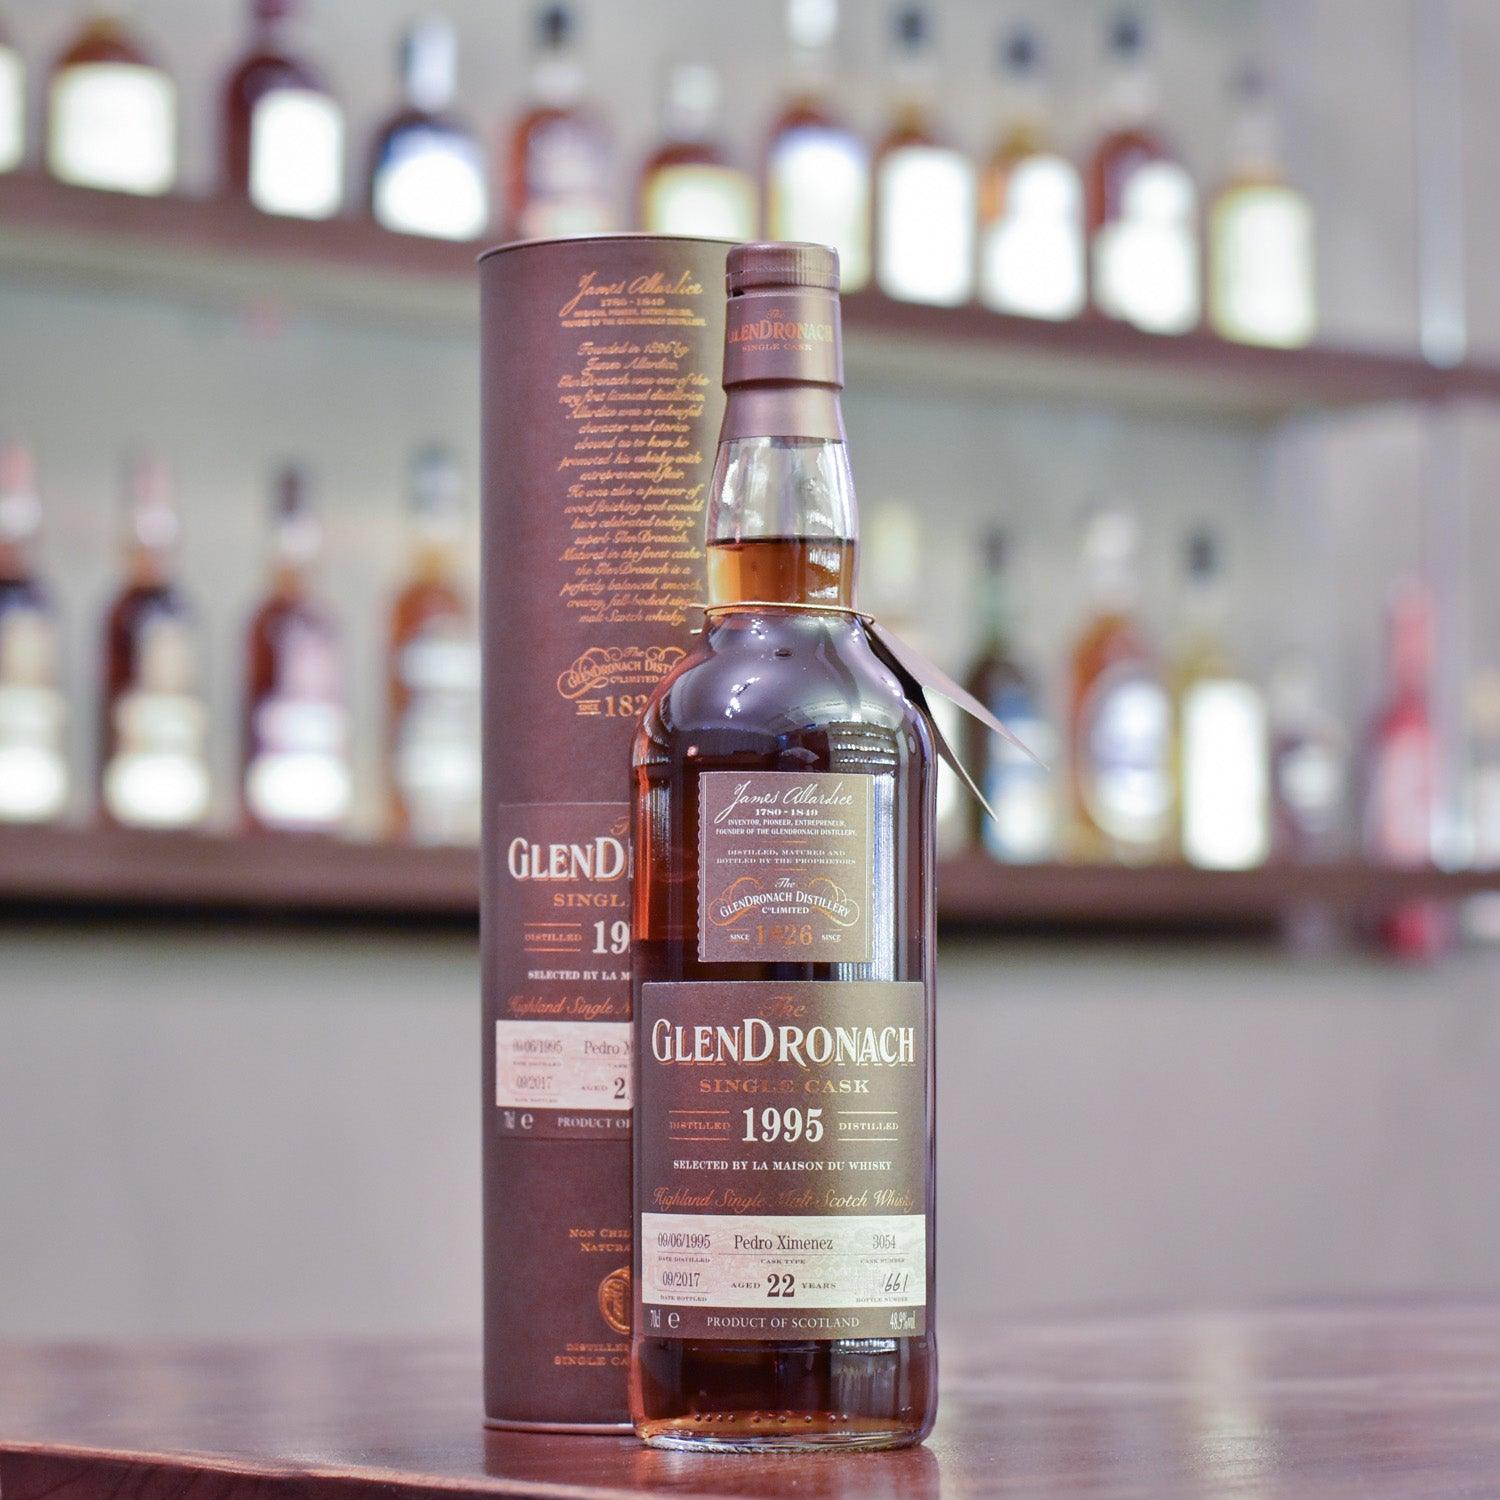 Glendronach 22 Year Old 1995 for LMdW Cask 3054 - The Rare Malt